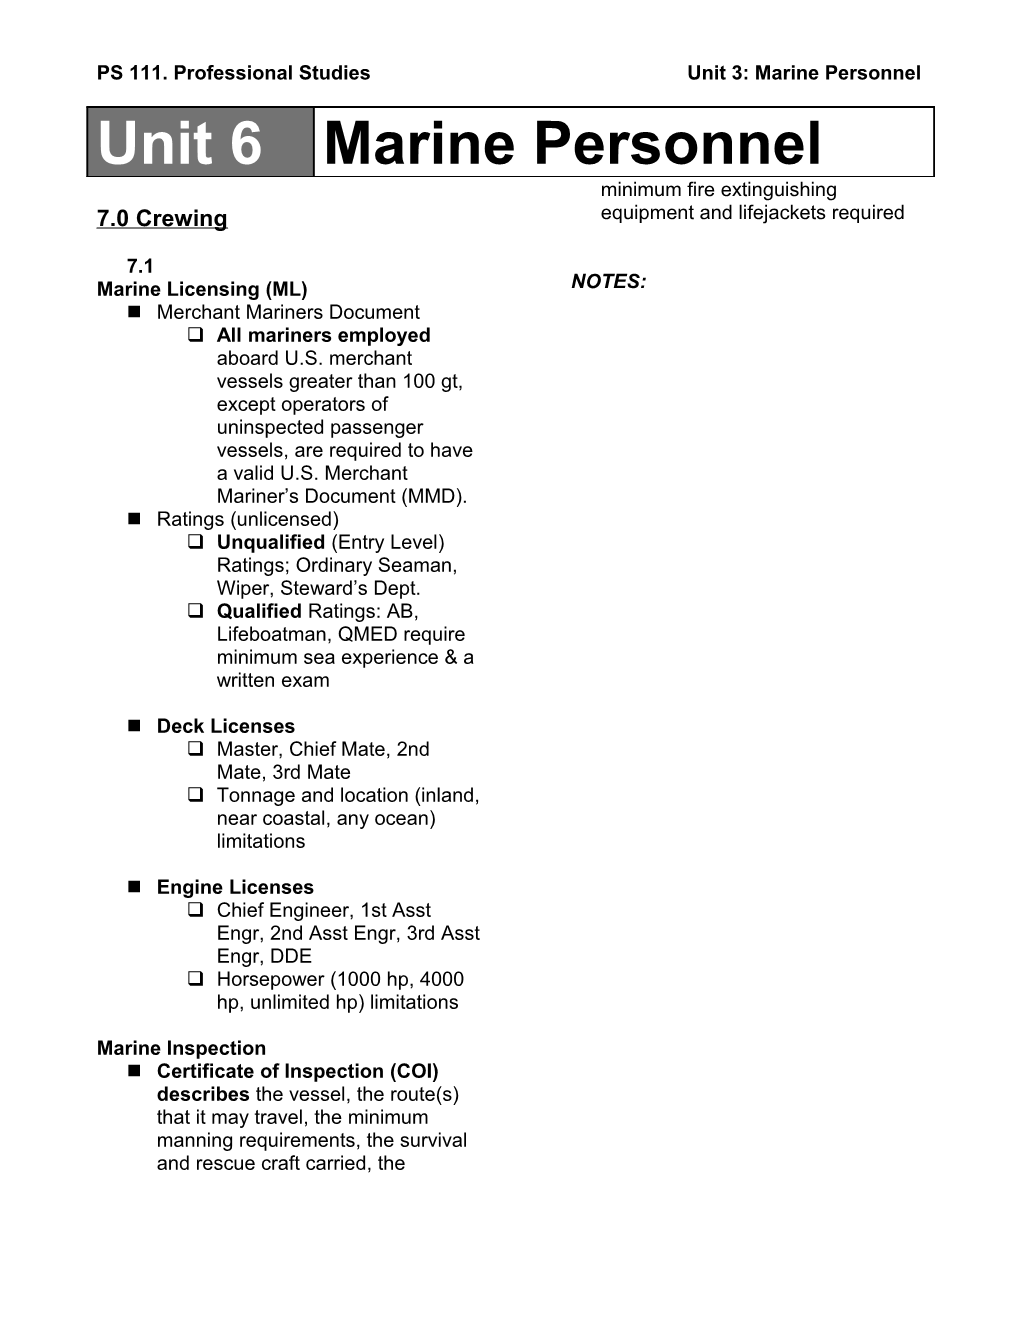 Unqualified (Entry Level) Ratings; Ordinary Seaman, Wiper, Steward S Dept